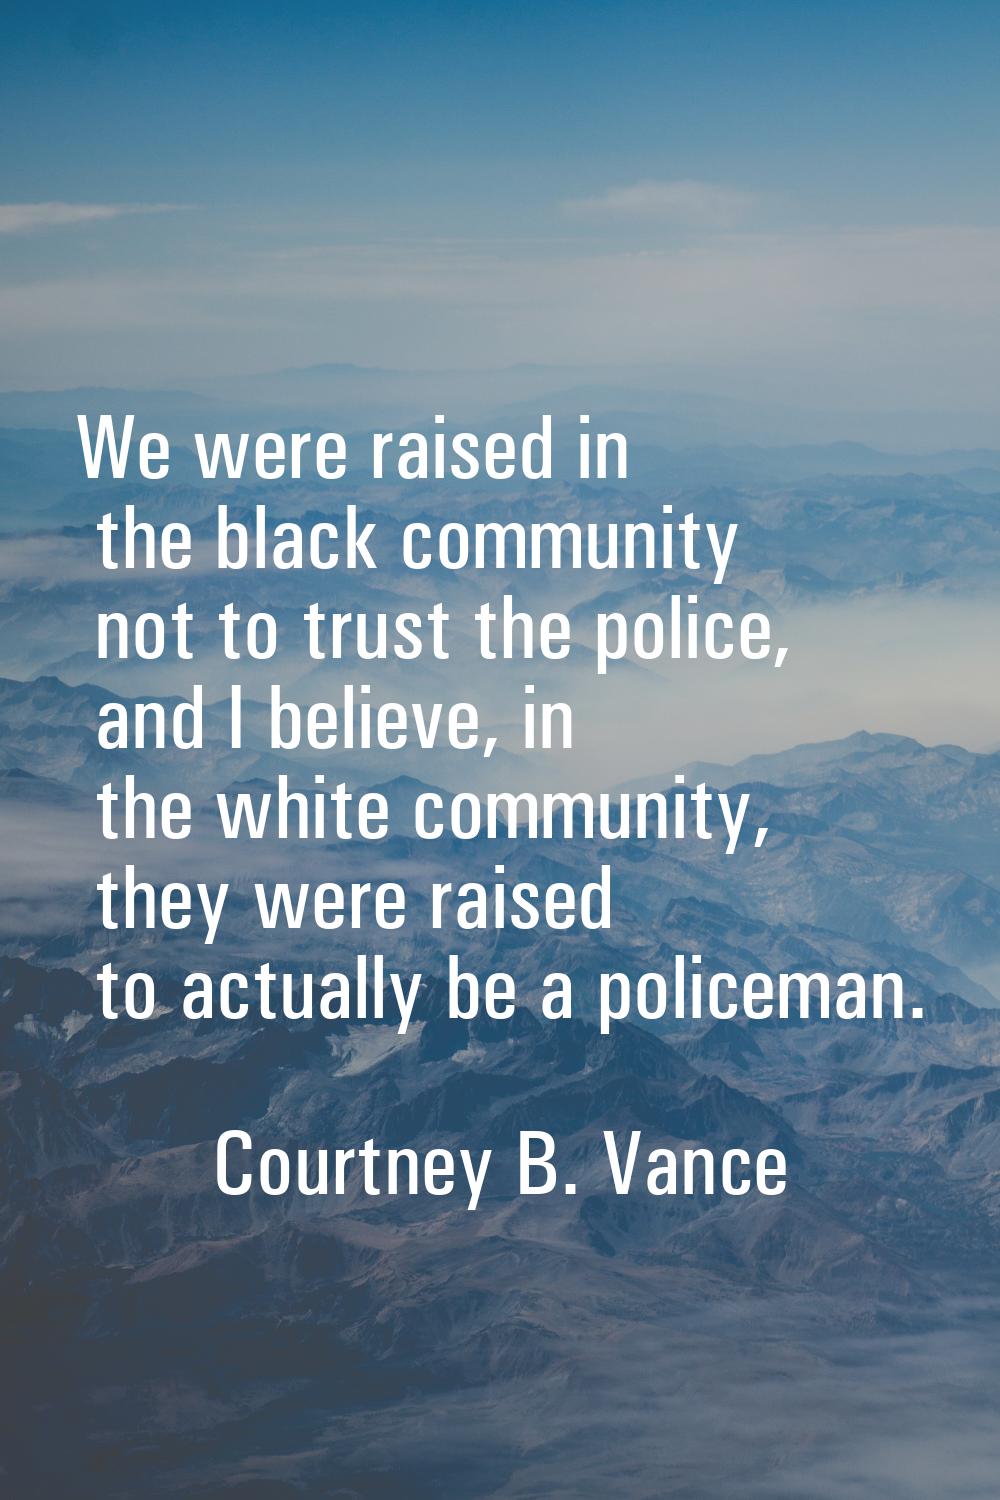 We were raised in the black community not to trust the police, and I believe, in the white communit